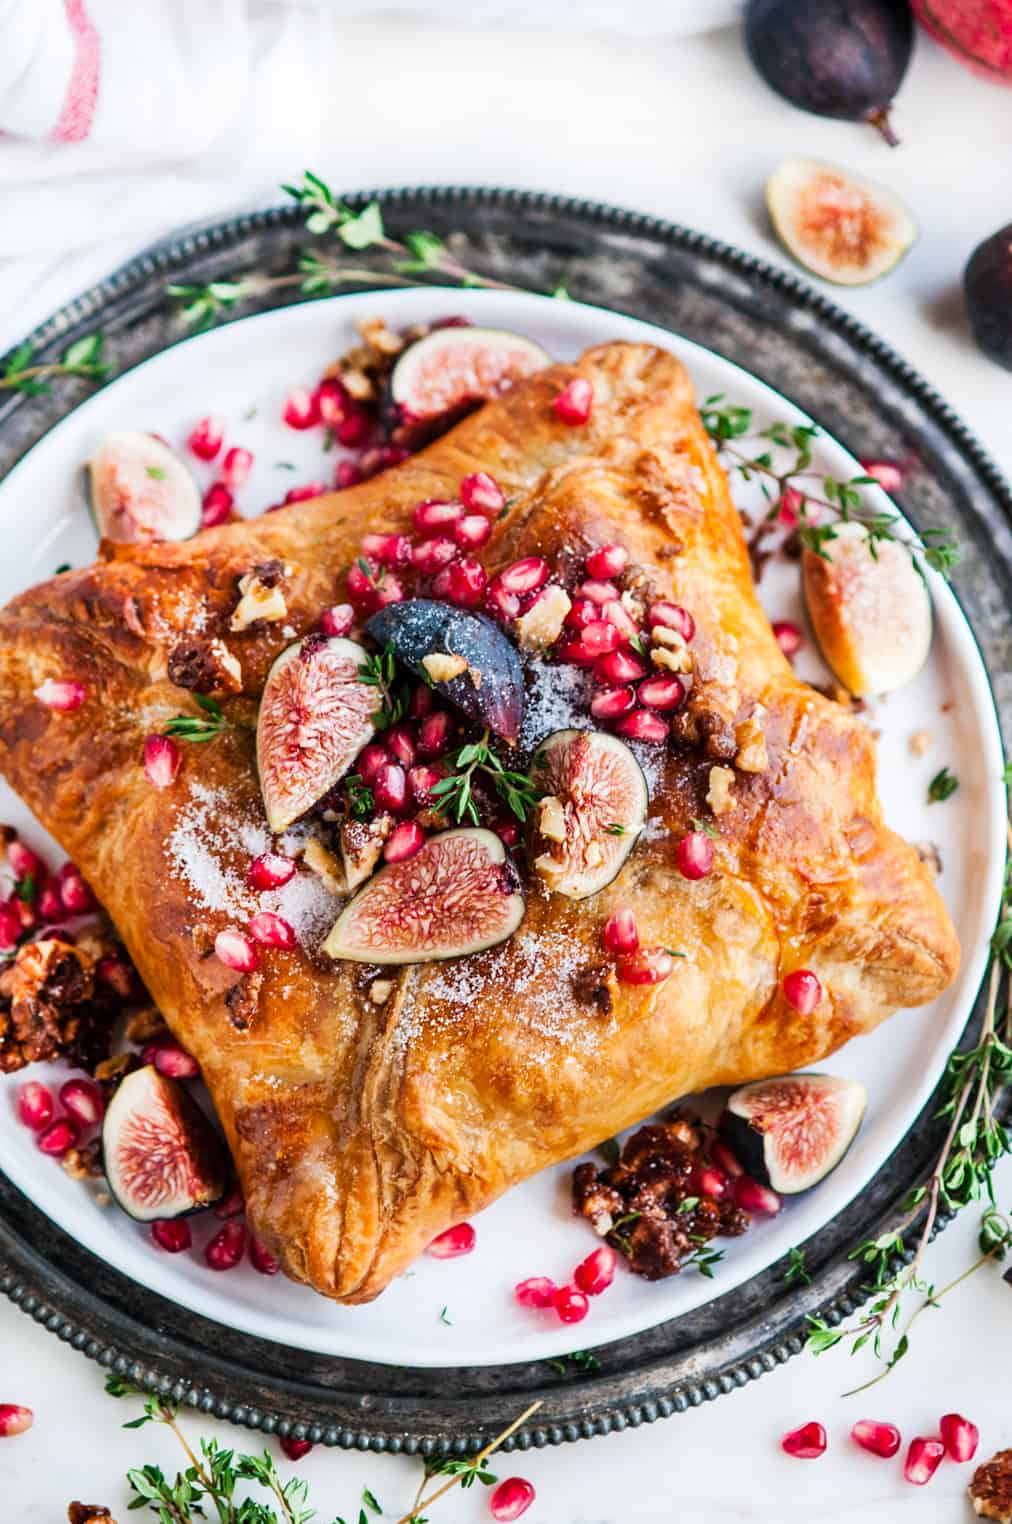 https://www.aberdeenskitchen.com/wp-content/uploads/2017/10/Puff-Pastry-Baked-Brie-with-Fig-and-Candied-Walnuts-1.jpg